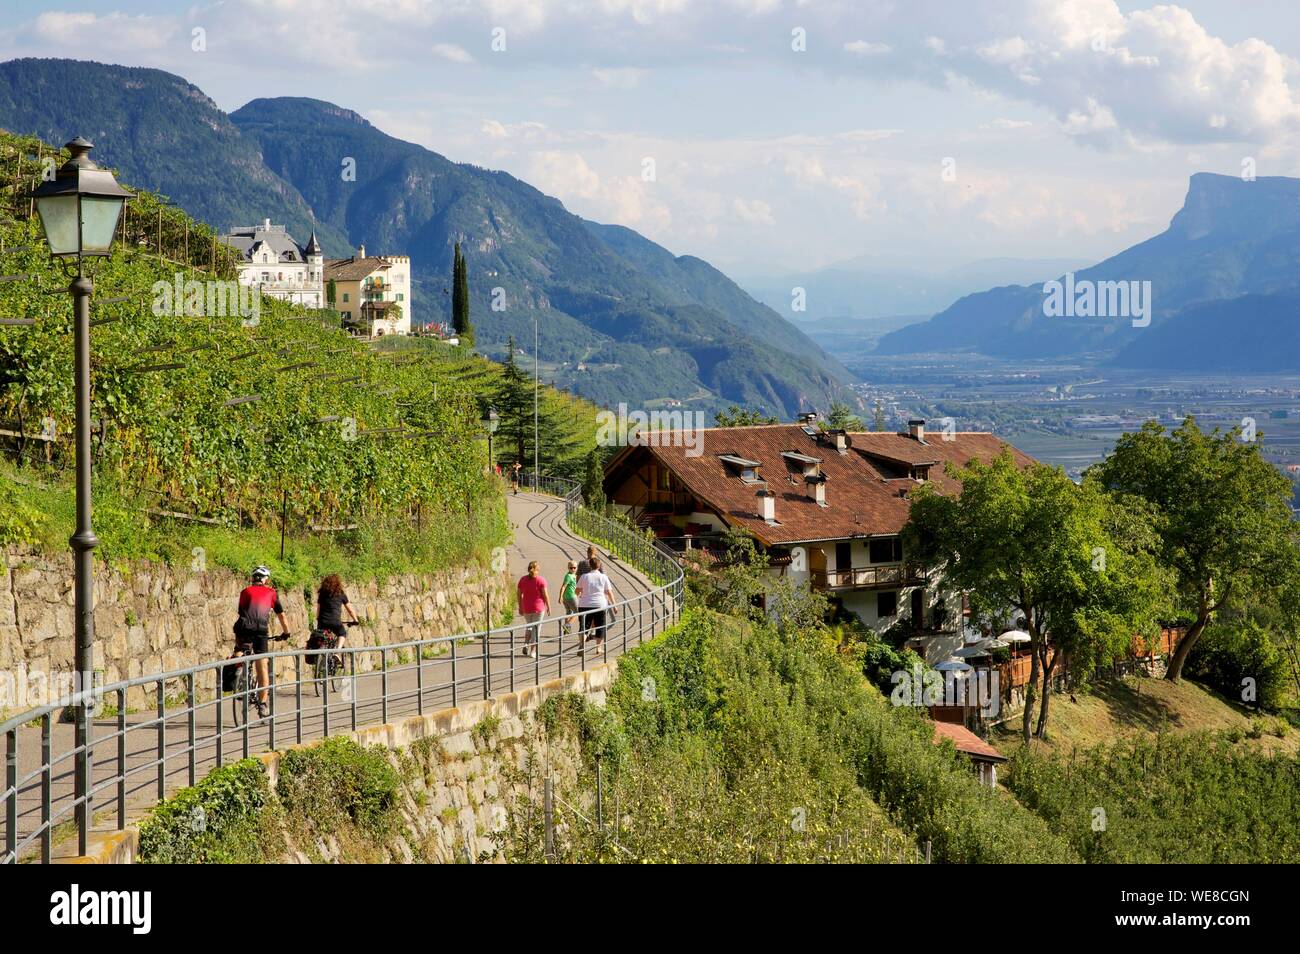 Italy, autonomous province of Bolzano, Tirol, hikers and cyclists on the trail leading from the Tyrol Castle to the village of Tirol which gave its name to the Tyrol region Stock Photo